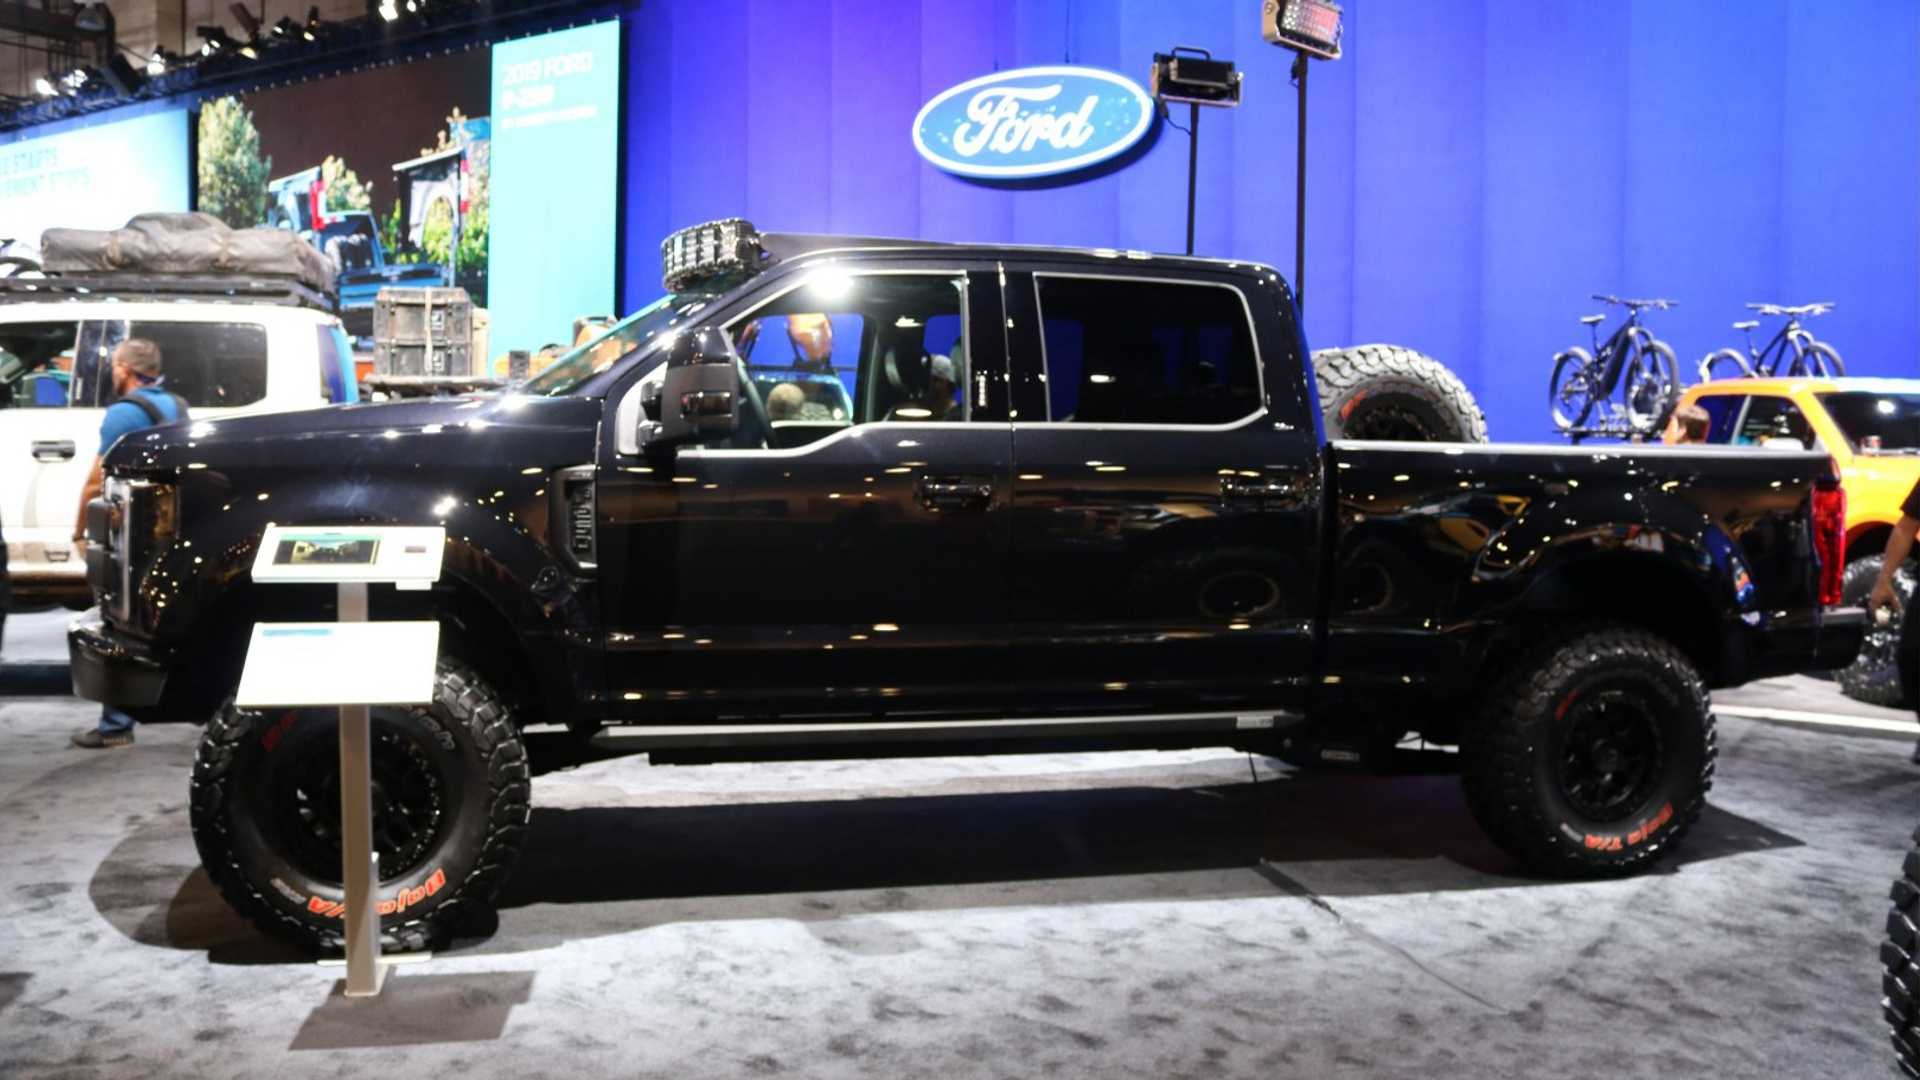 Check Out 8 Custom Ford F Series Pickups Coming To SEMA [UPDATE]